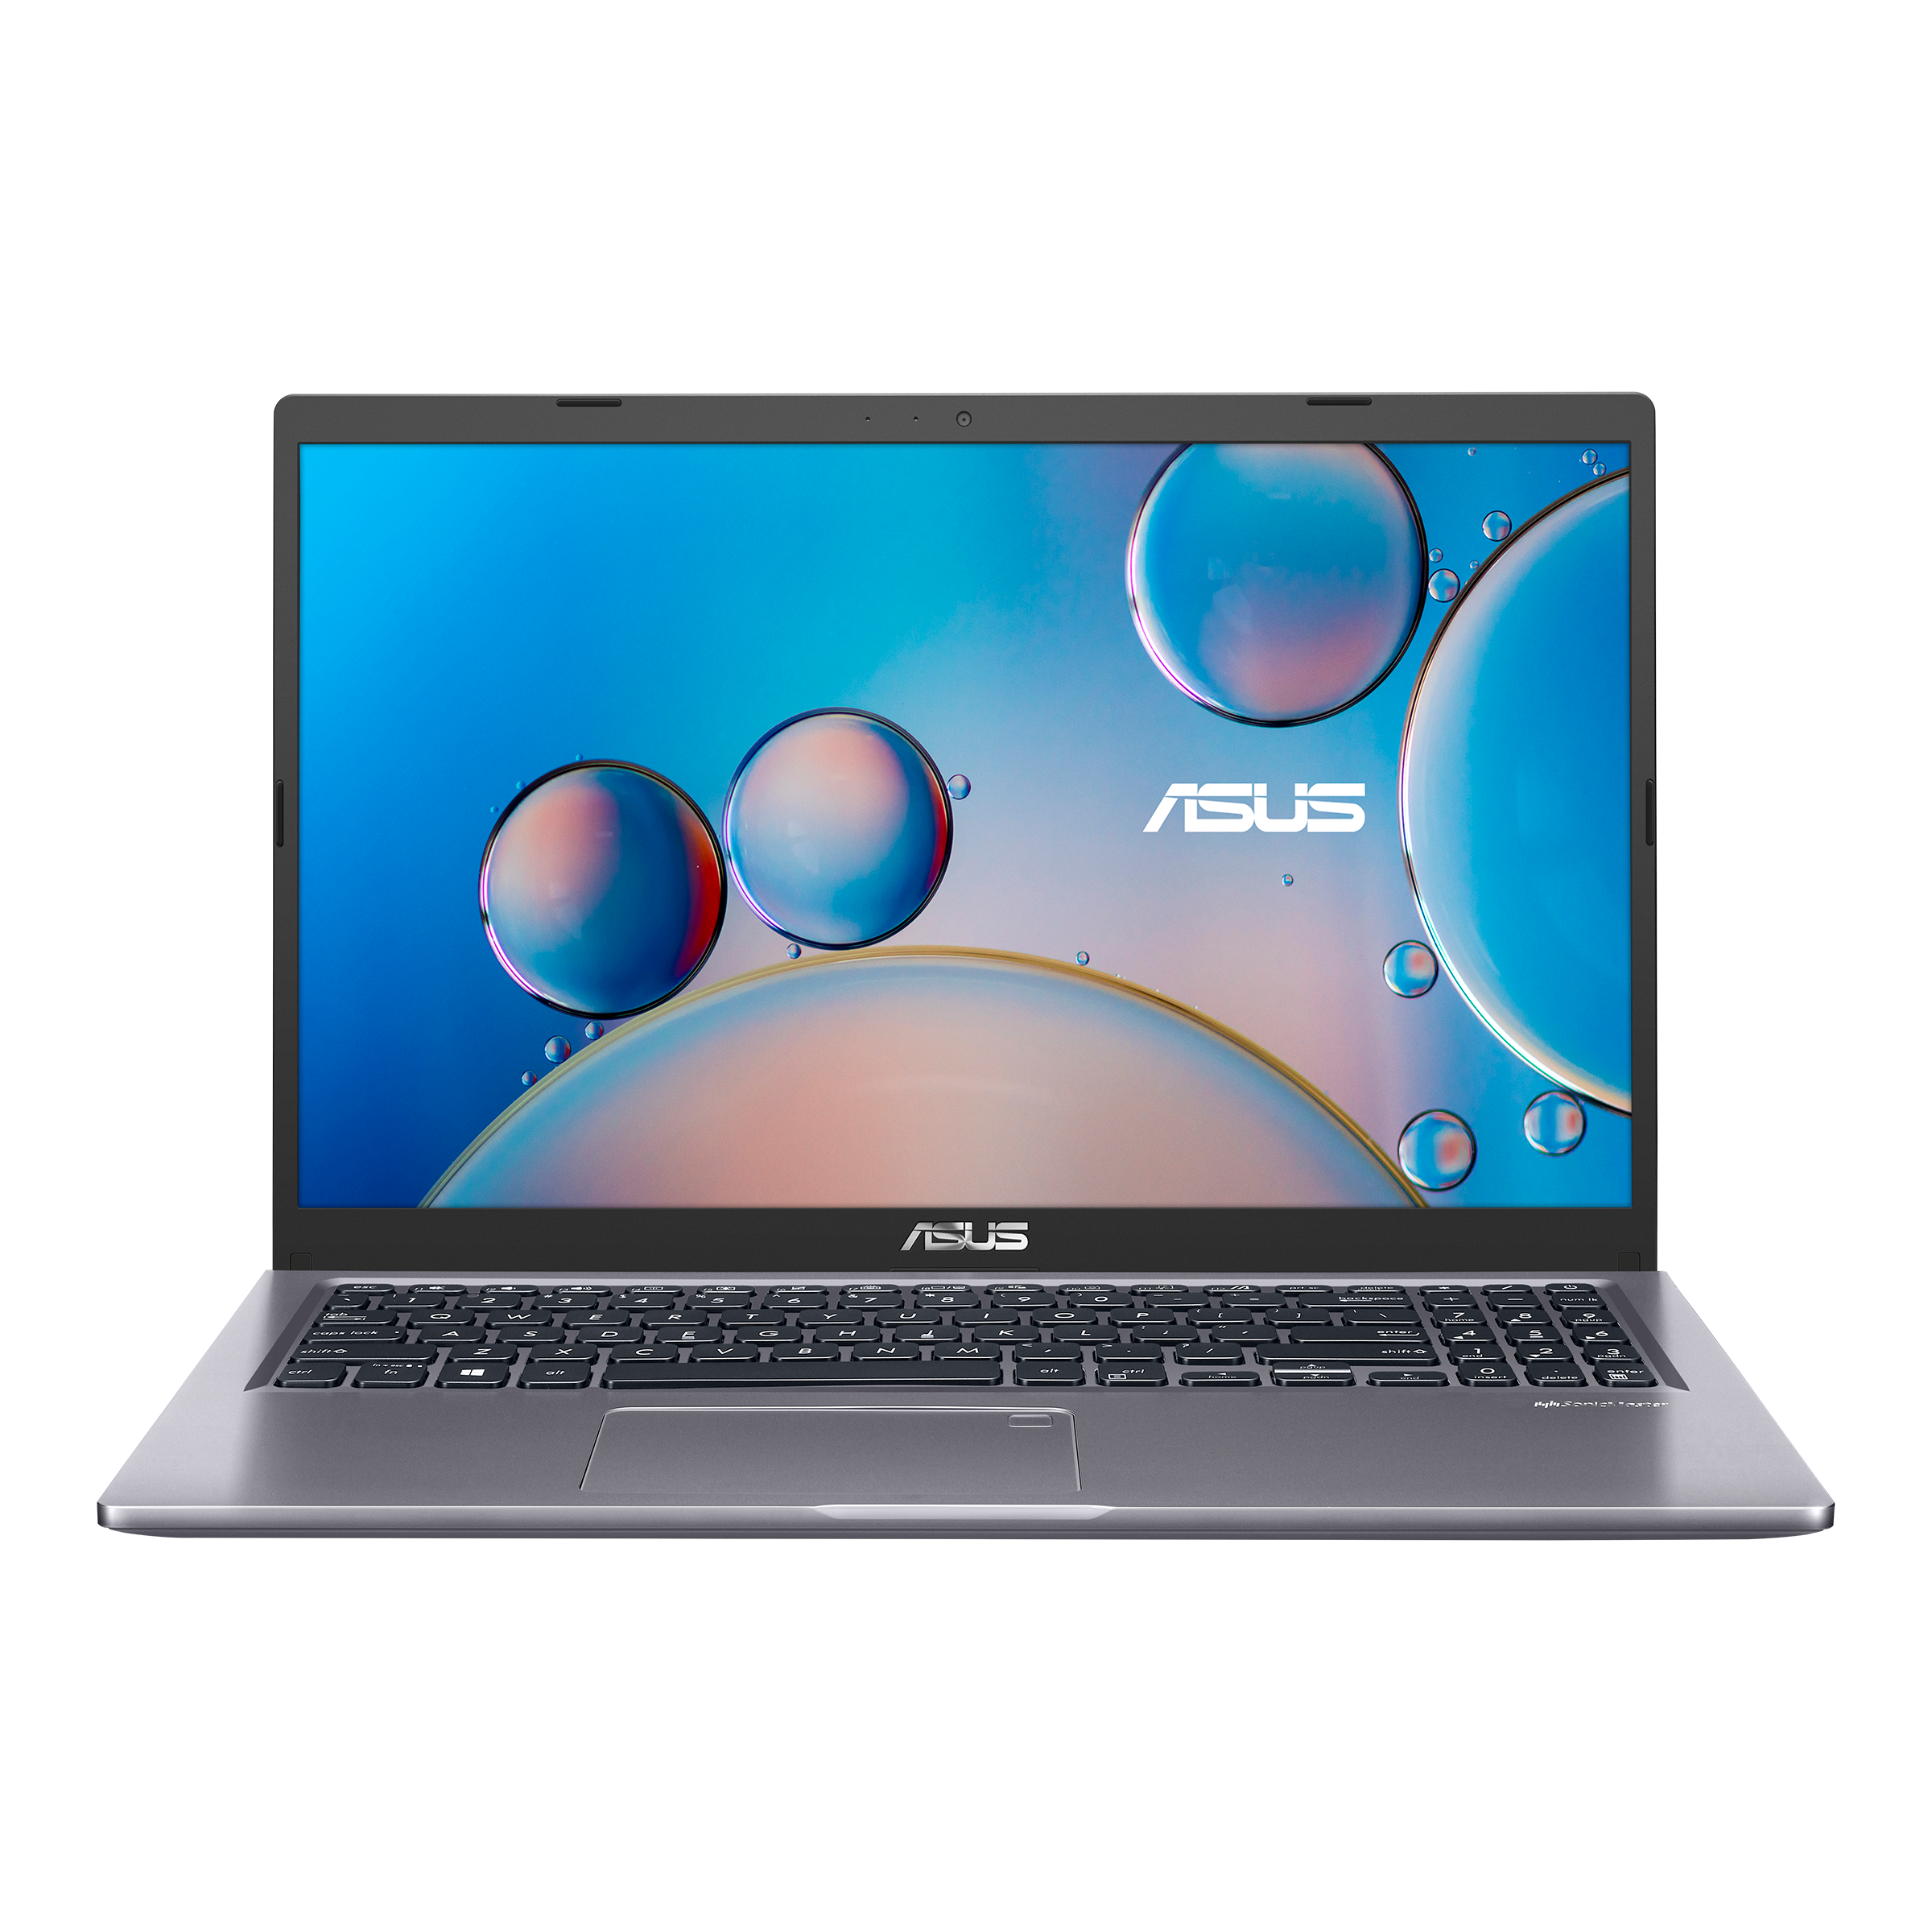 ASUS X515｜Laptops For Home｜ASUS Global